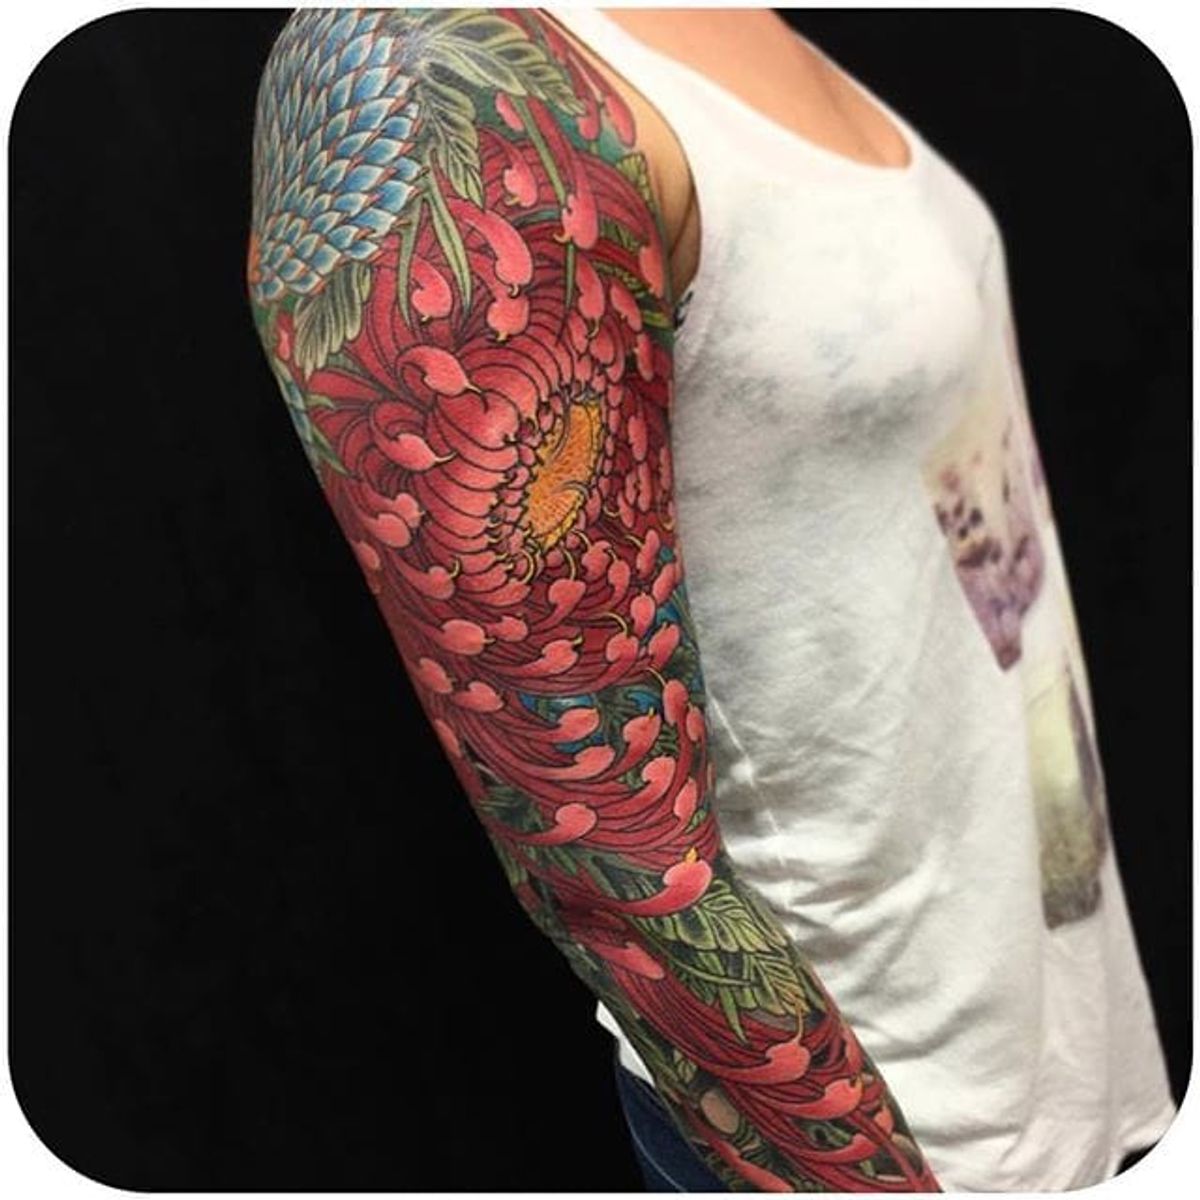 Tattoo uploaded by Tattoodo • Another beautiful and colorful ...